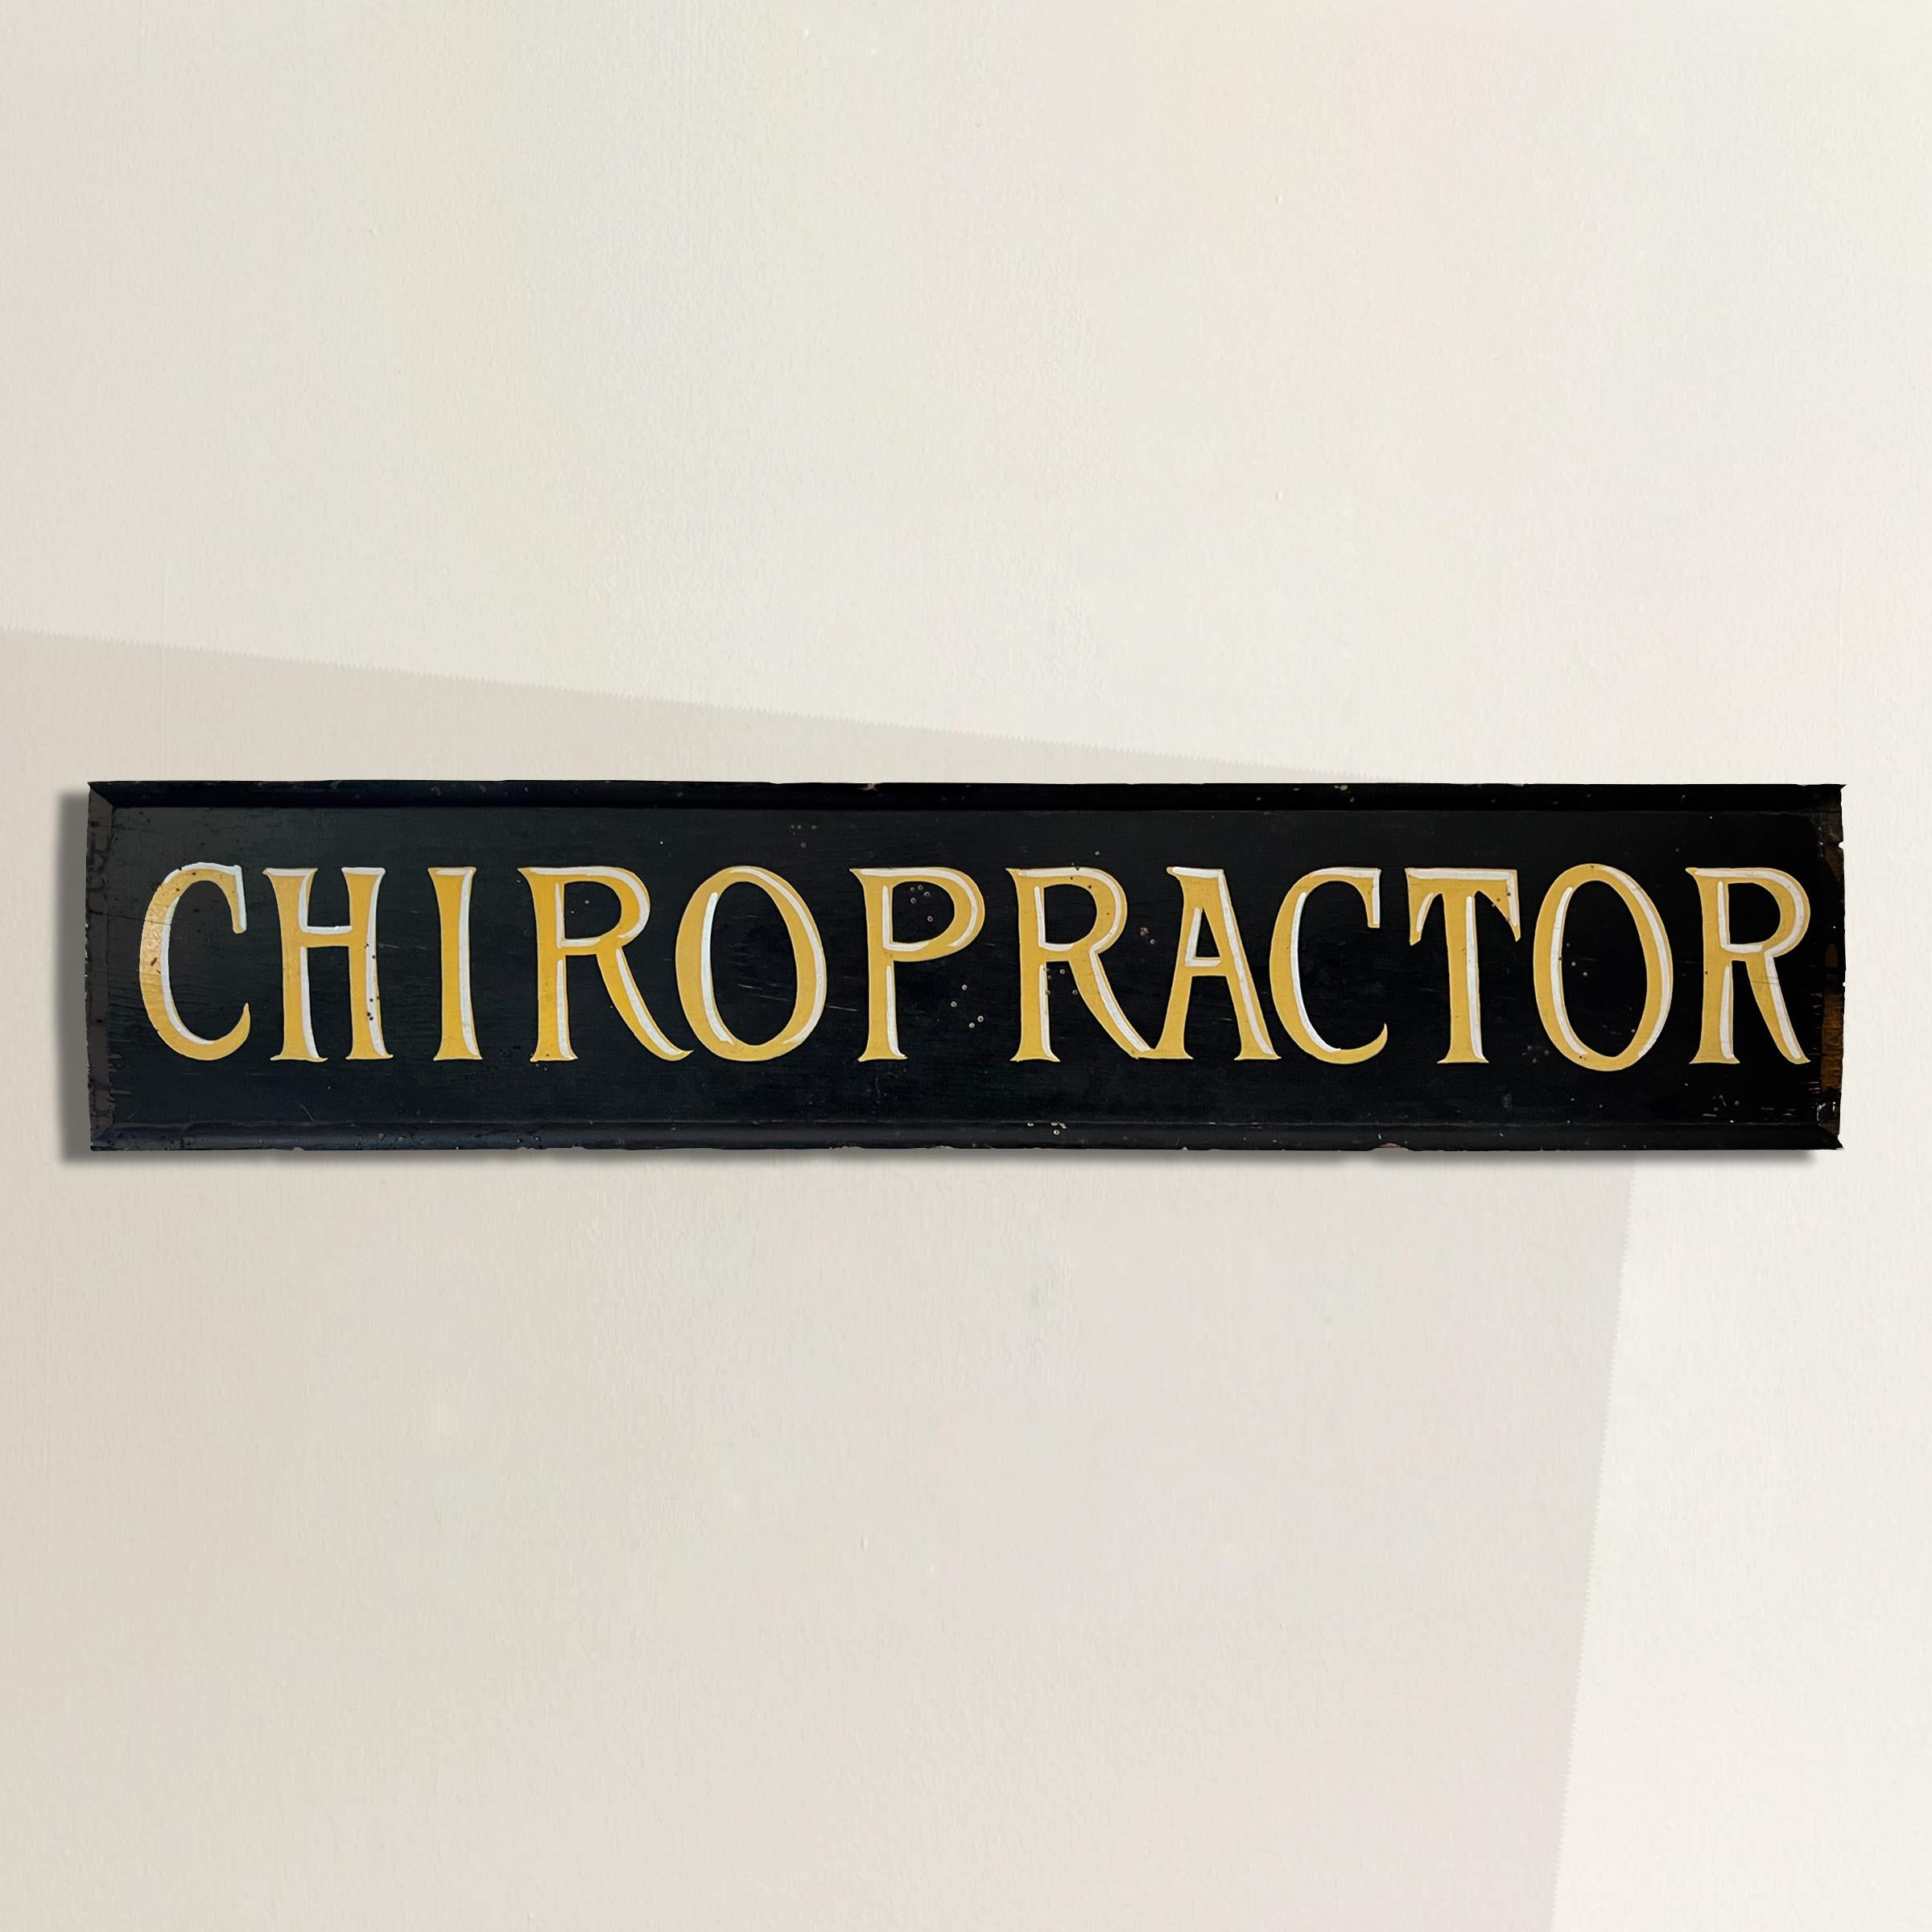 Own a piece of Wisconsin's history with this early 20th century hand-painted sign from an early 20th-century chiropractor's office. The sign, found in a barn in the heart of Wisconsin, features a classic black background adorned with bold, radiant